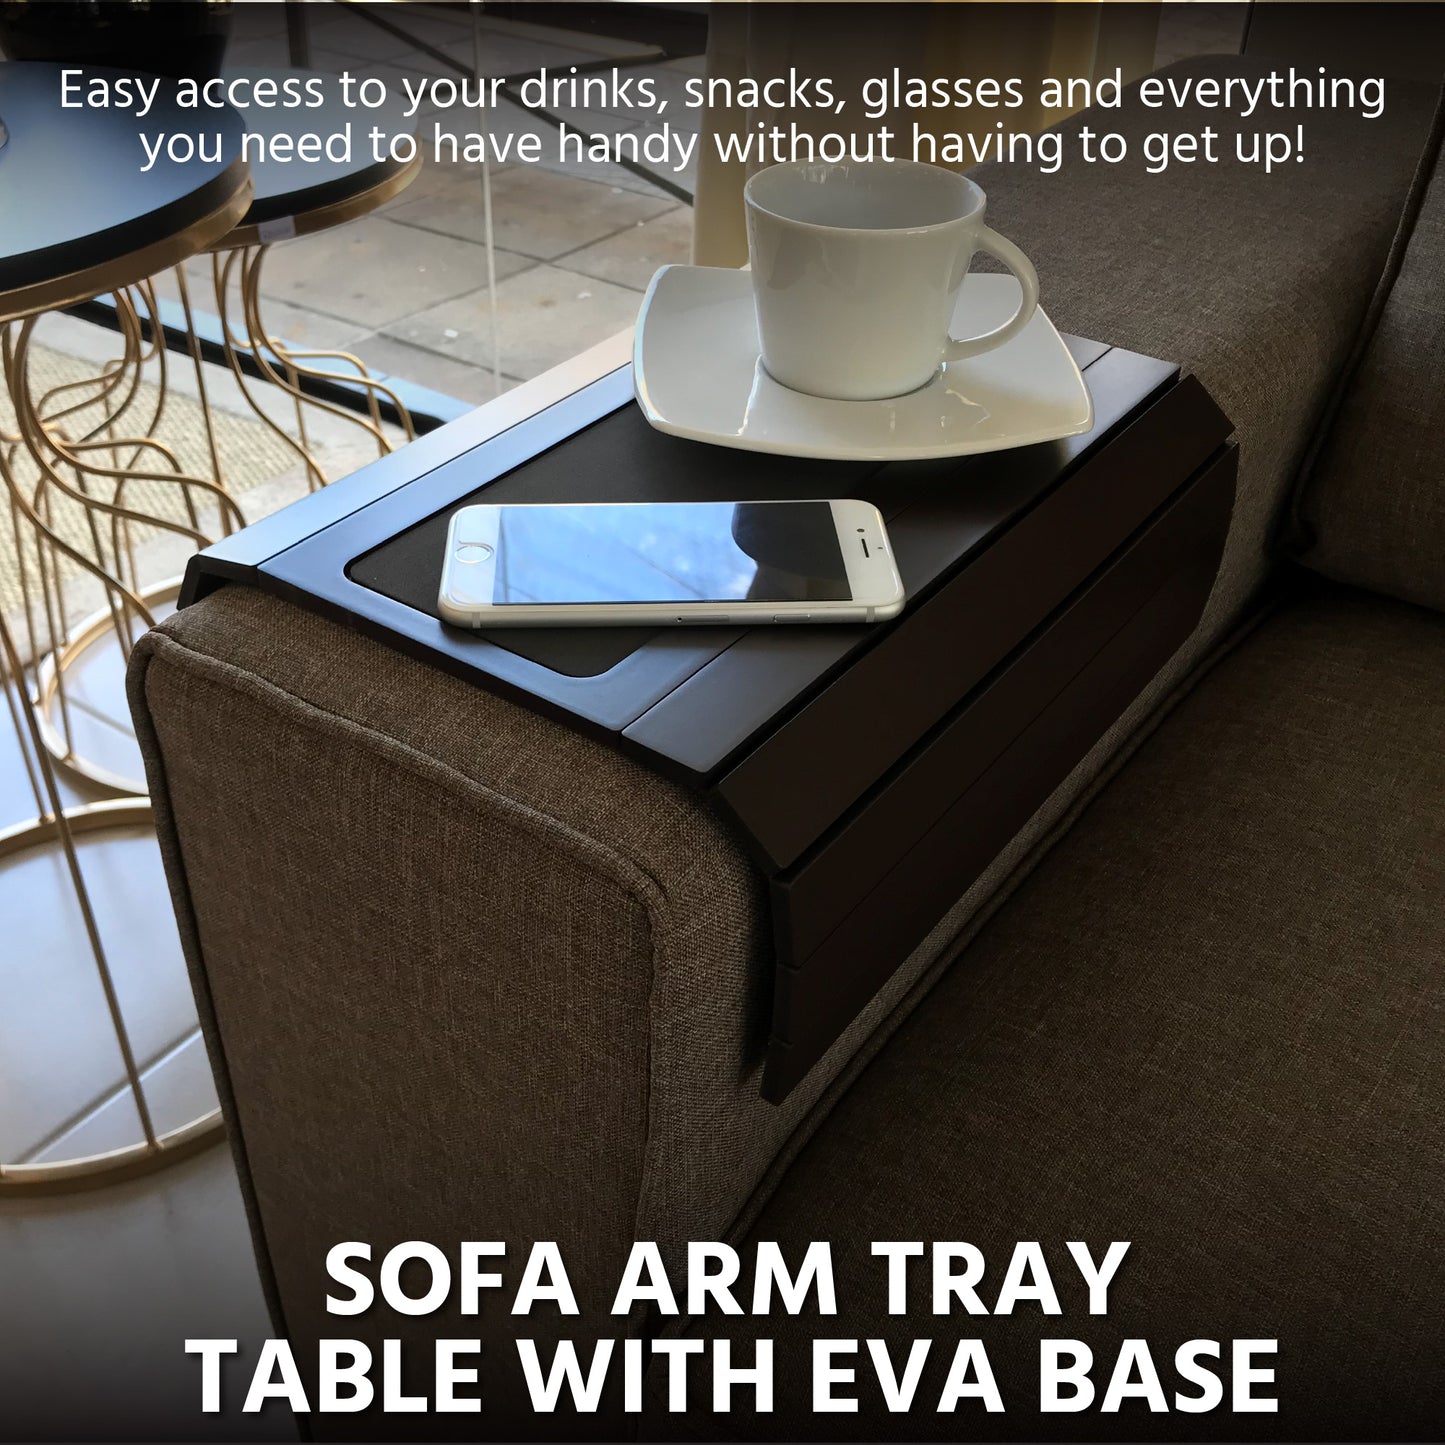 Sofa Couch Arm Tray Table with EVA Base. Weighted Sides. Fits Over Square Chair arms